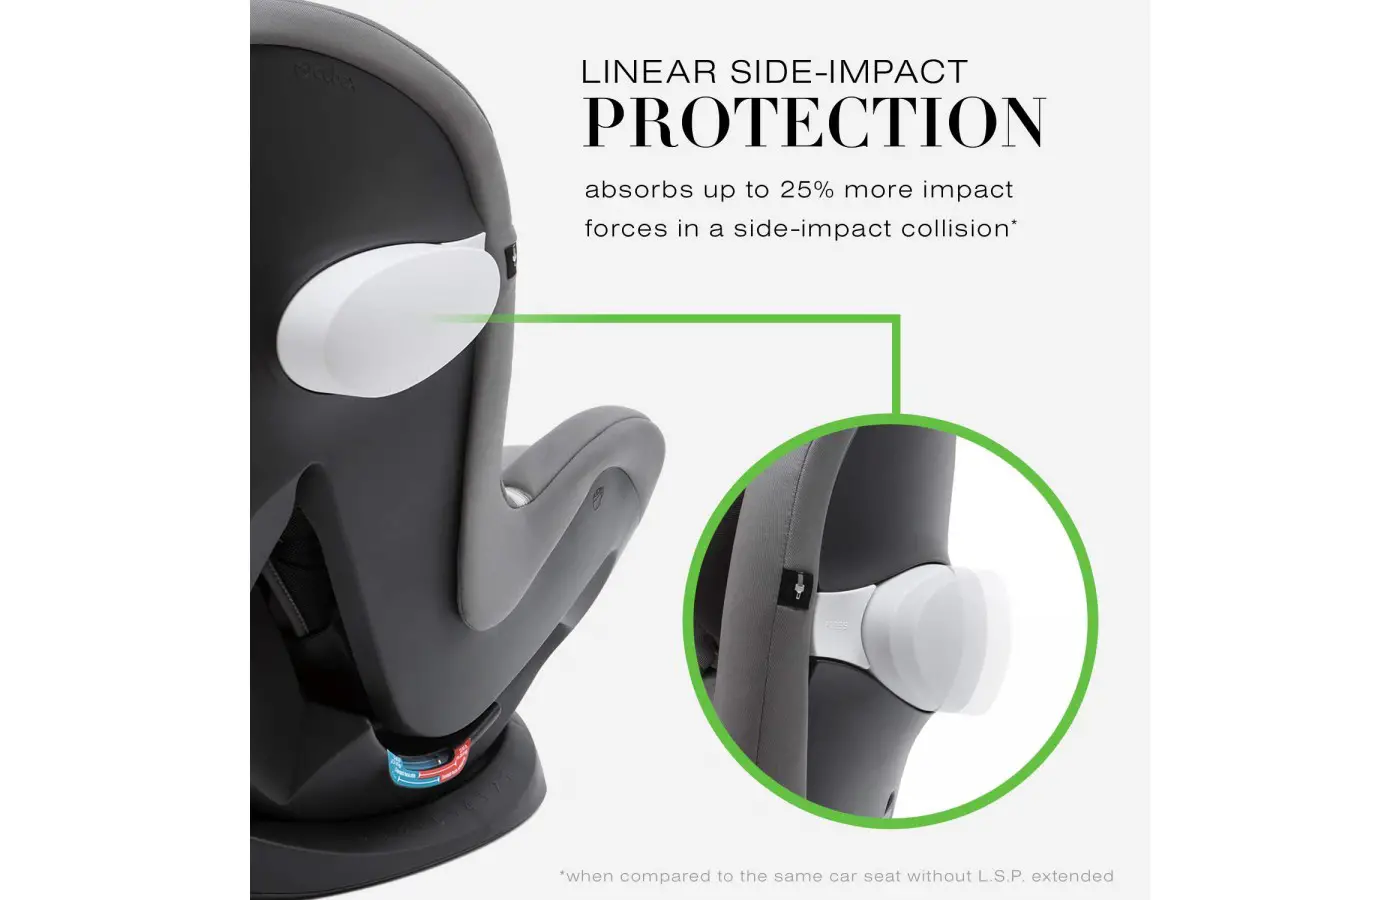 This car seat provides impact protection